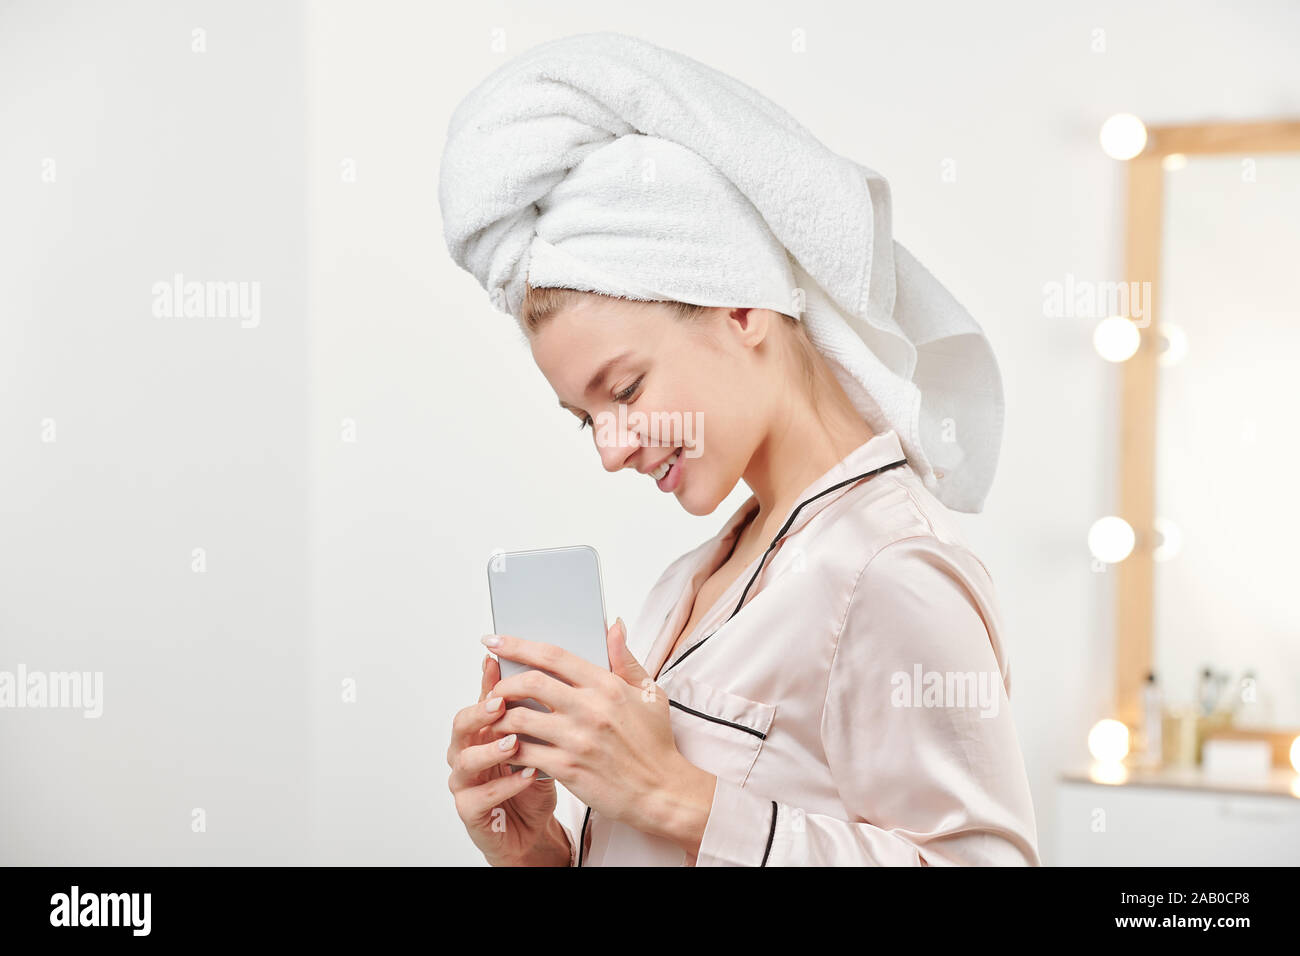 Pretty smiling girl with towel on head holding smartphone devant elle Banque D'Images